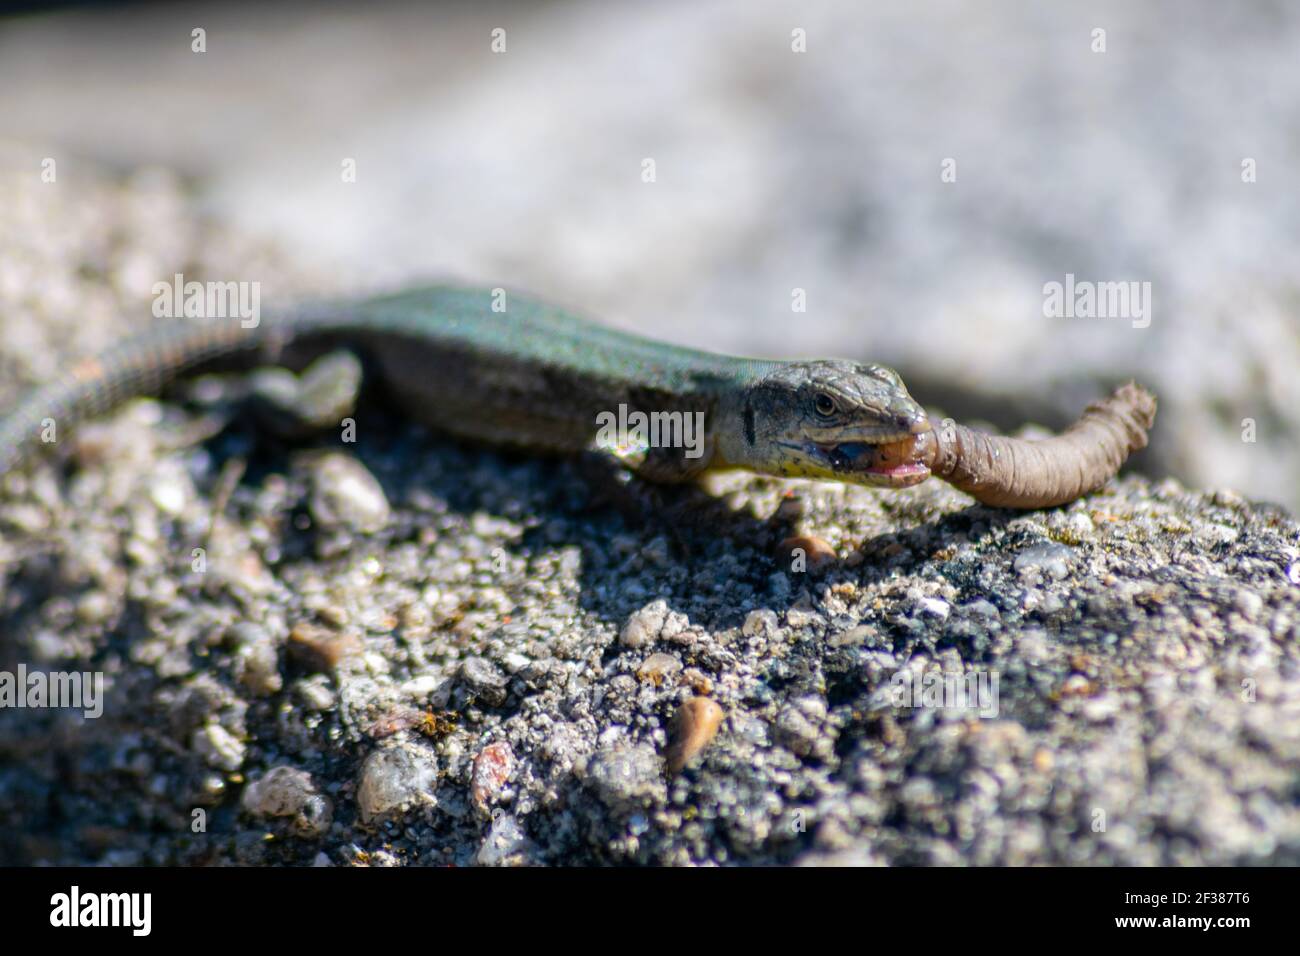 European Lizard with worms in the mouth, lagartixa portuguesa, great pest controller against worms and insects Stock Photo